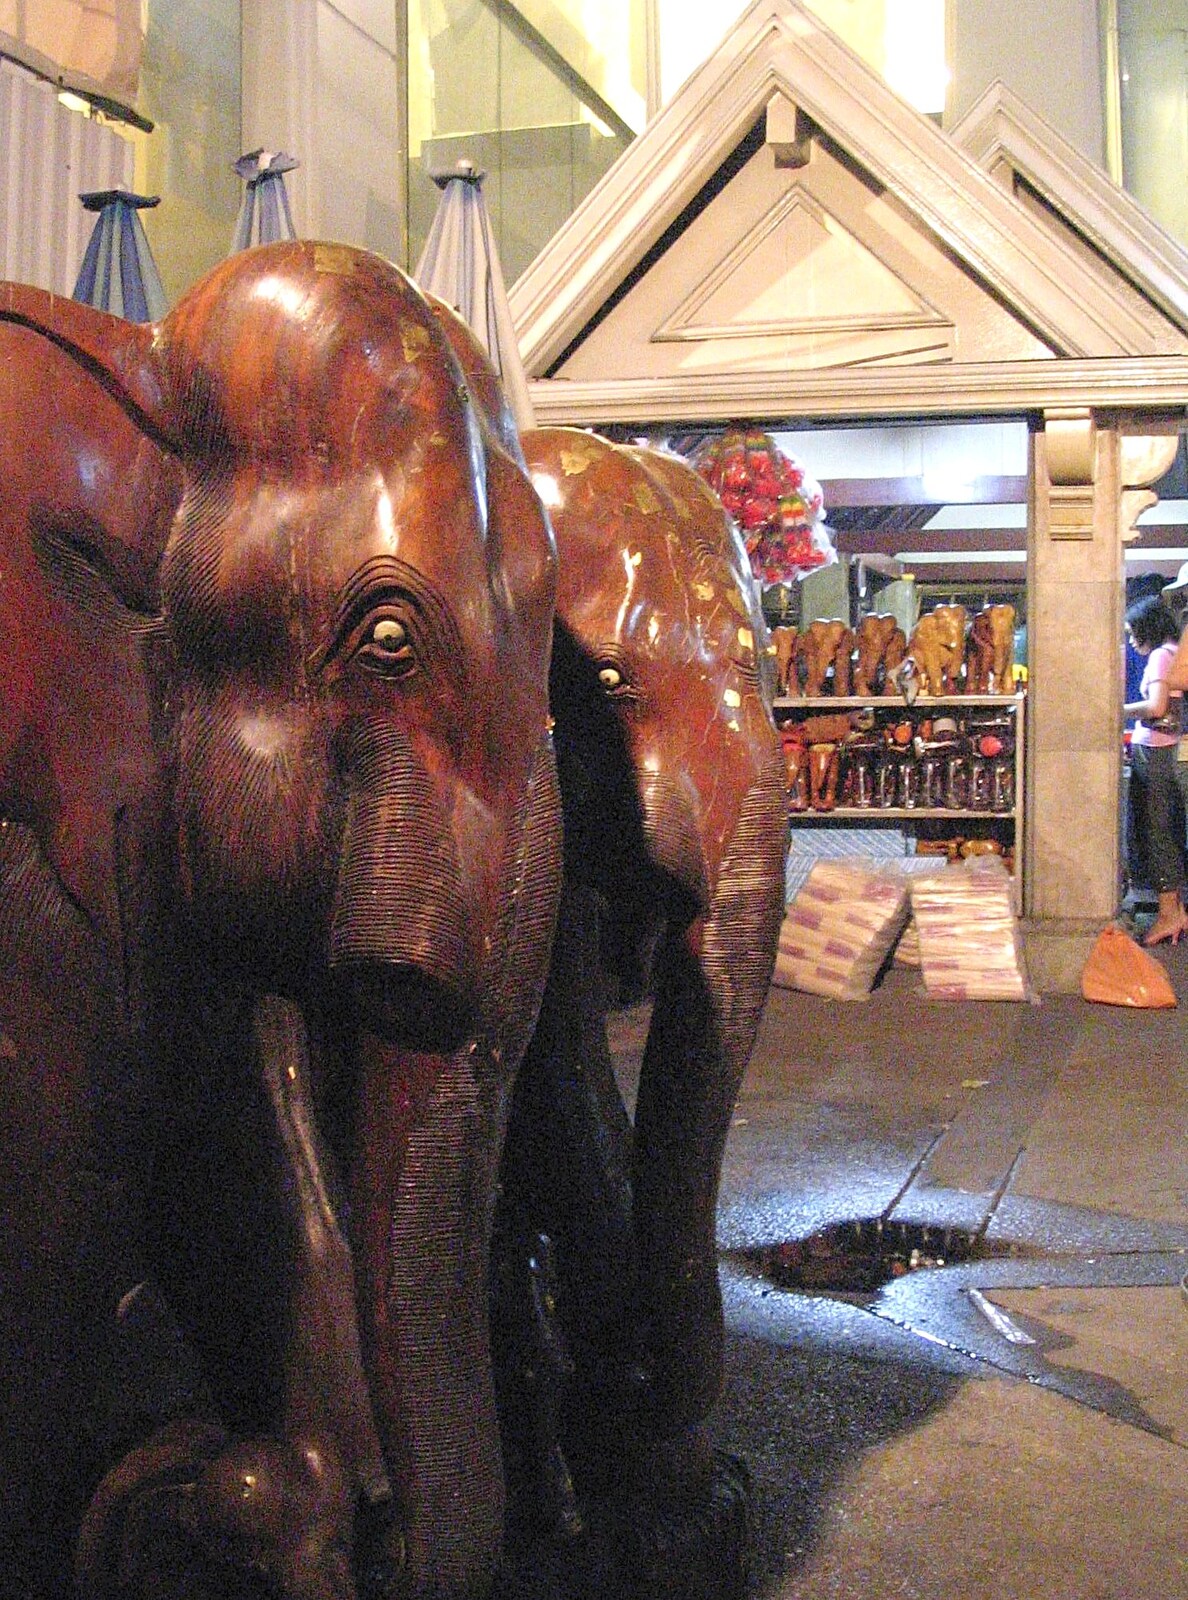 Wooden elephants with gold foil on their heads from A Working Trip to Bangkok, Thailand - 2nd October 2004